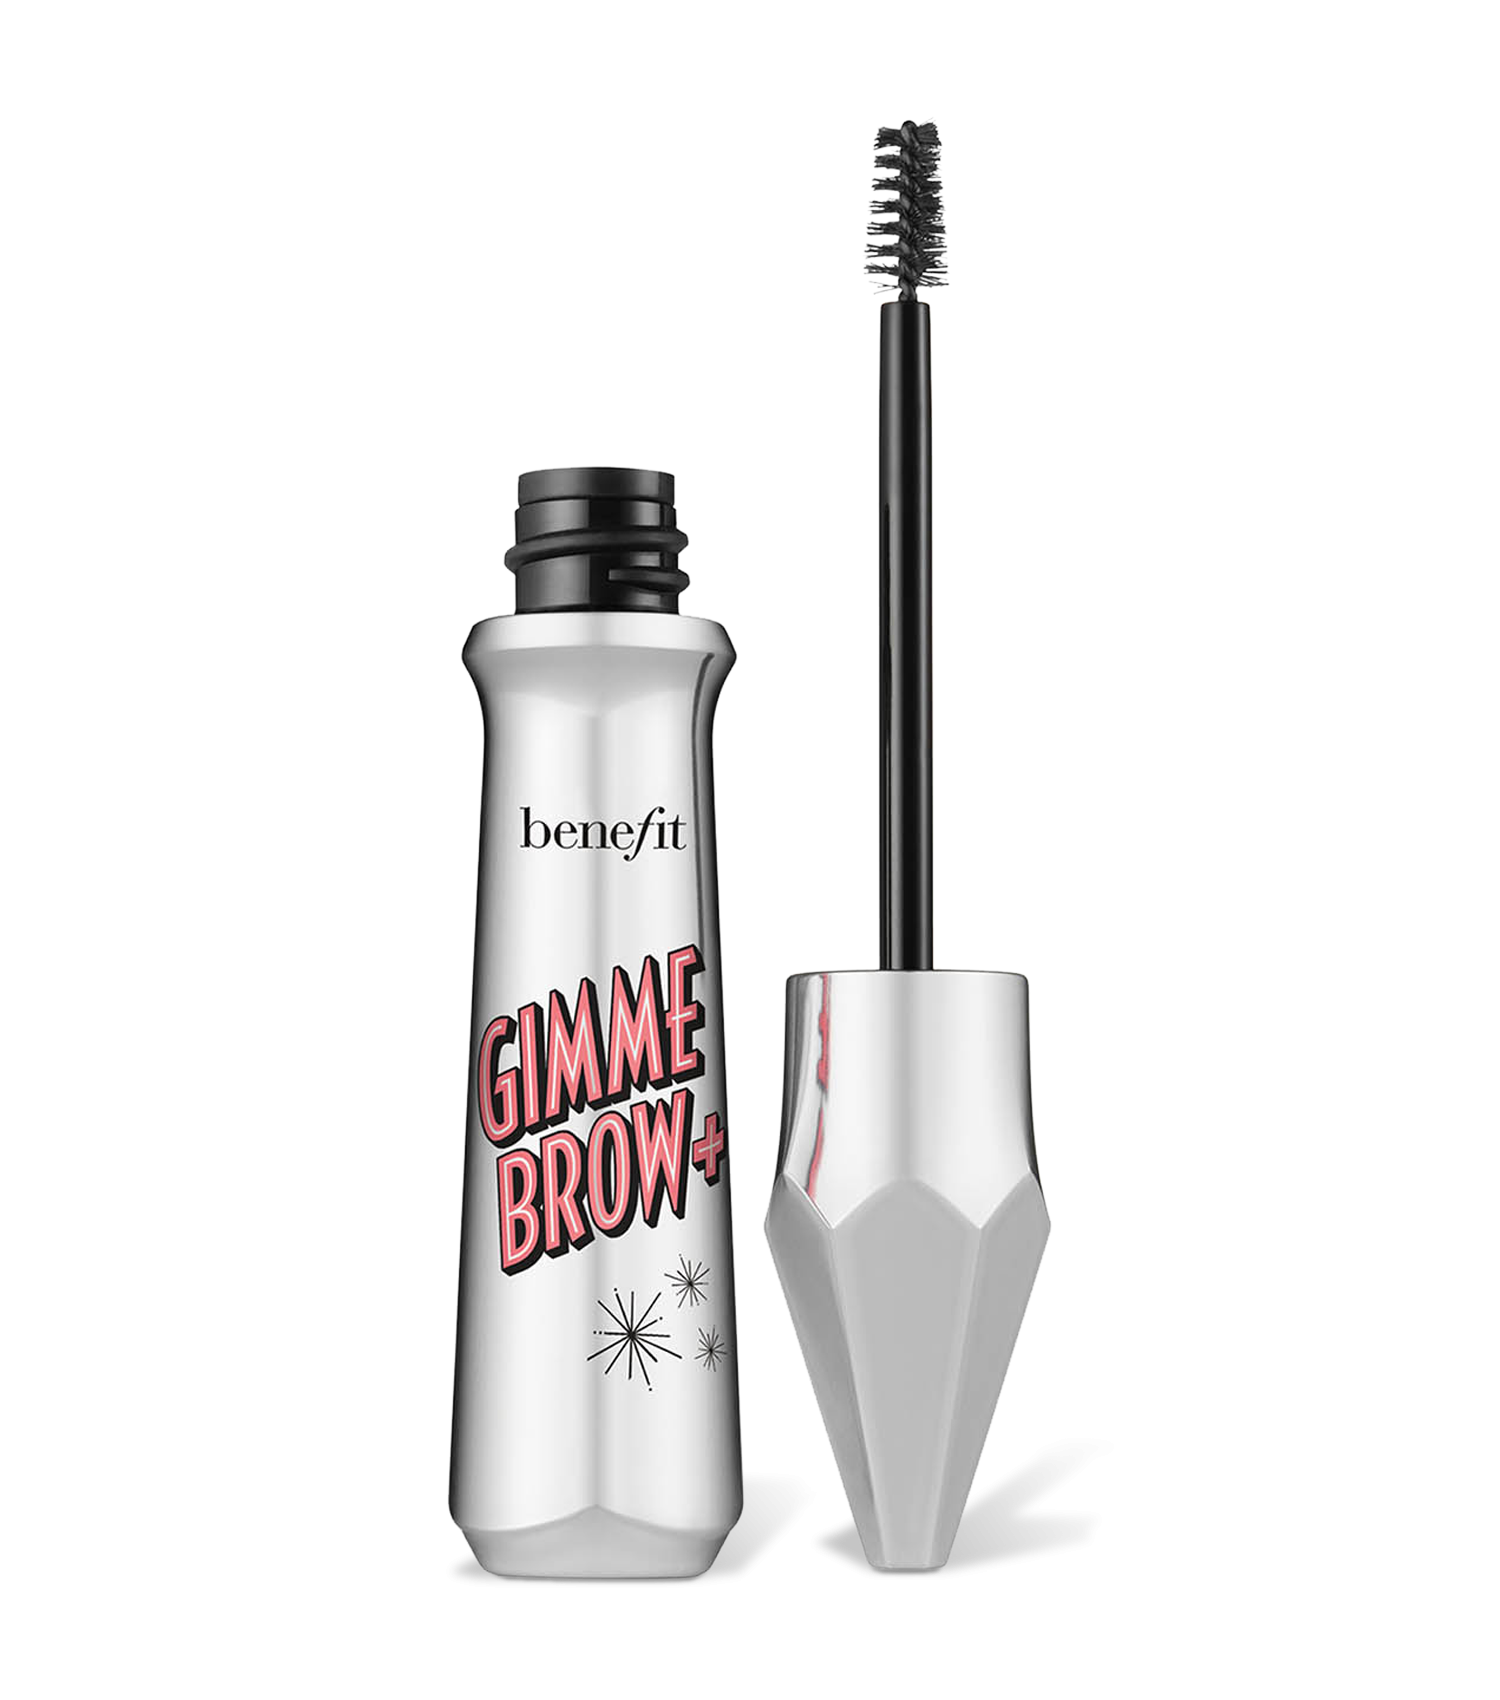 Gimme Brow+ Tinted Volumizing Eyebrow Gel Gimme Brow+ - 4.5 - deluxe sample 1